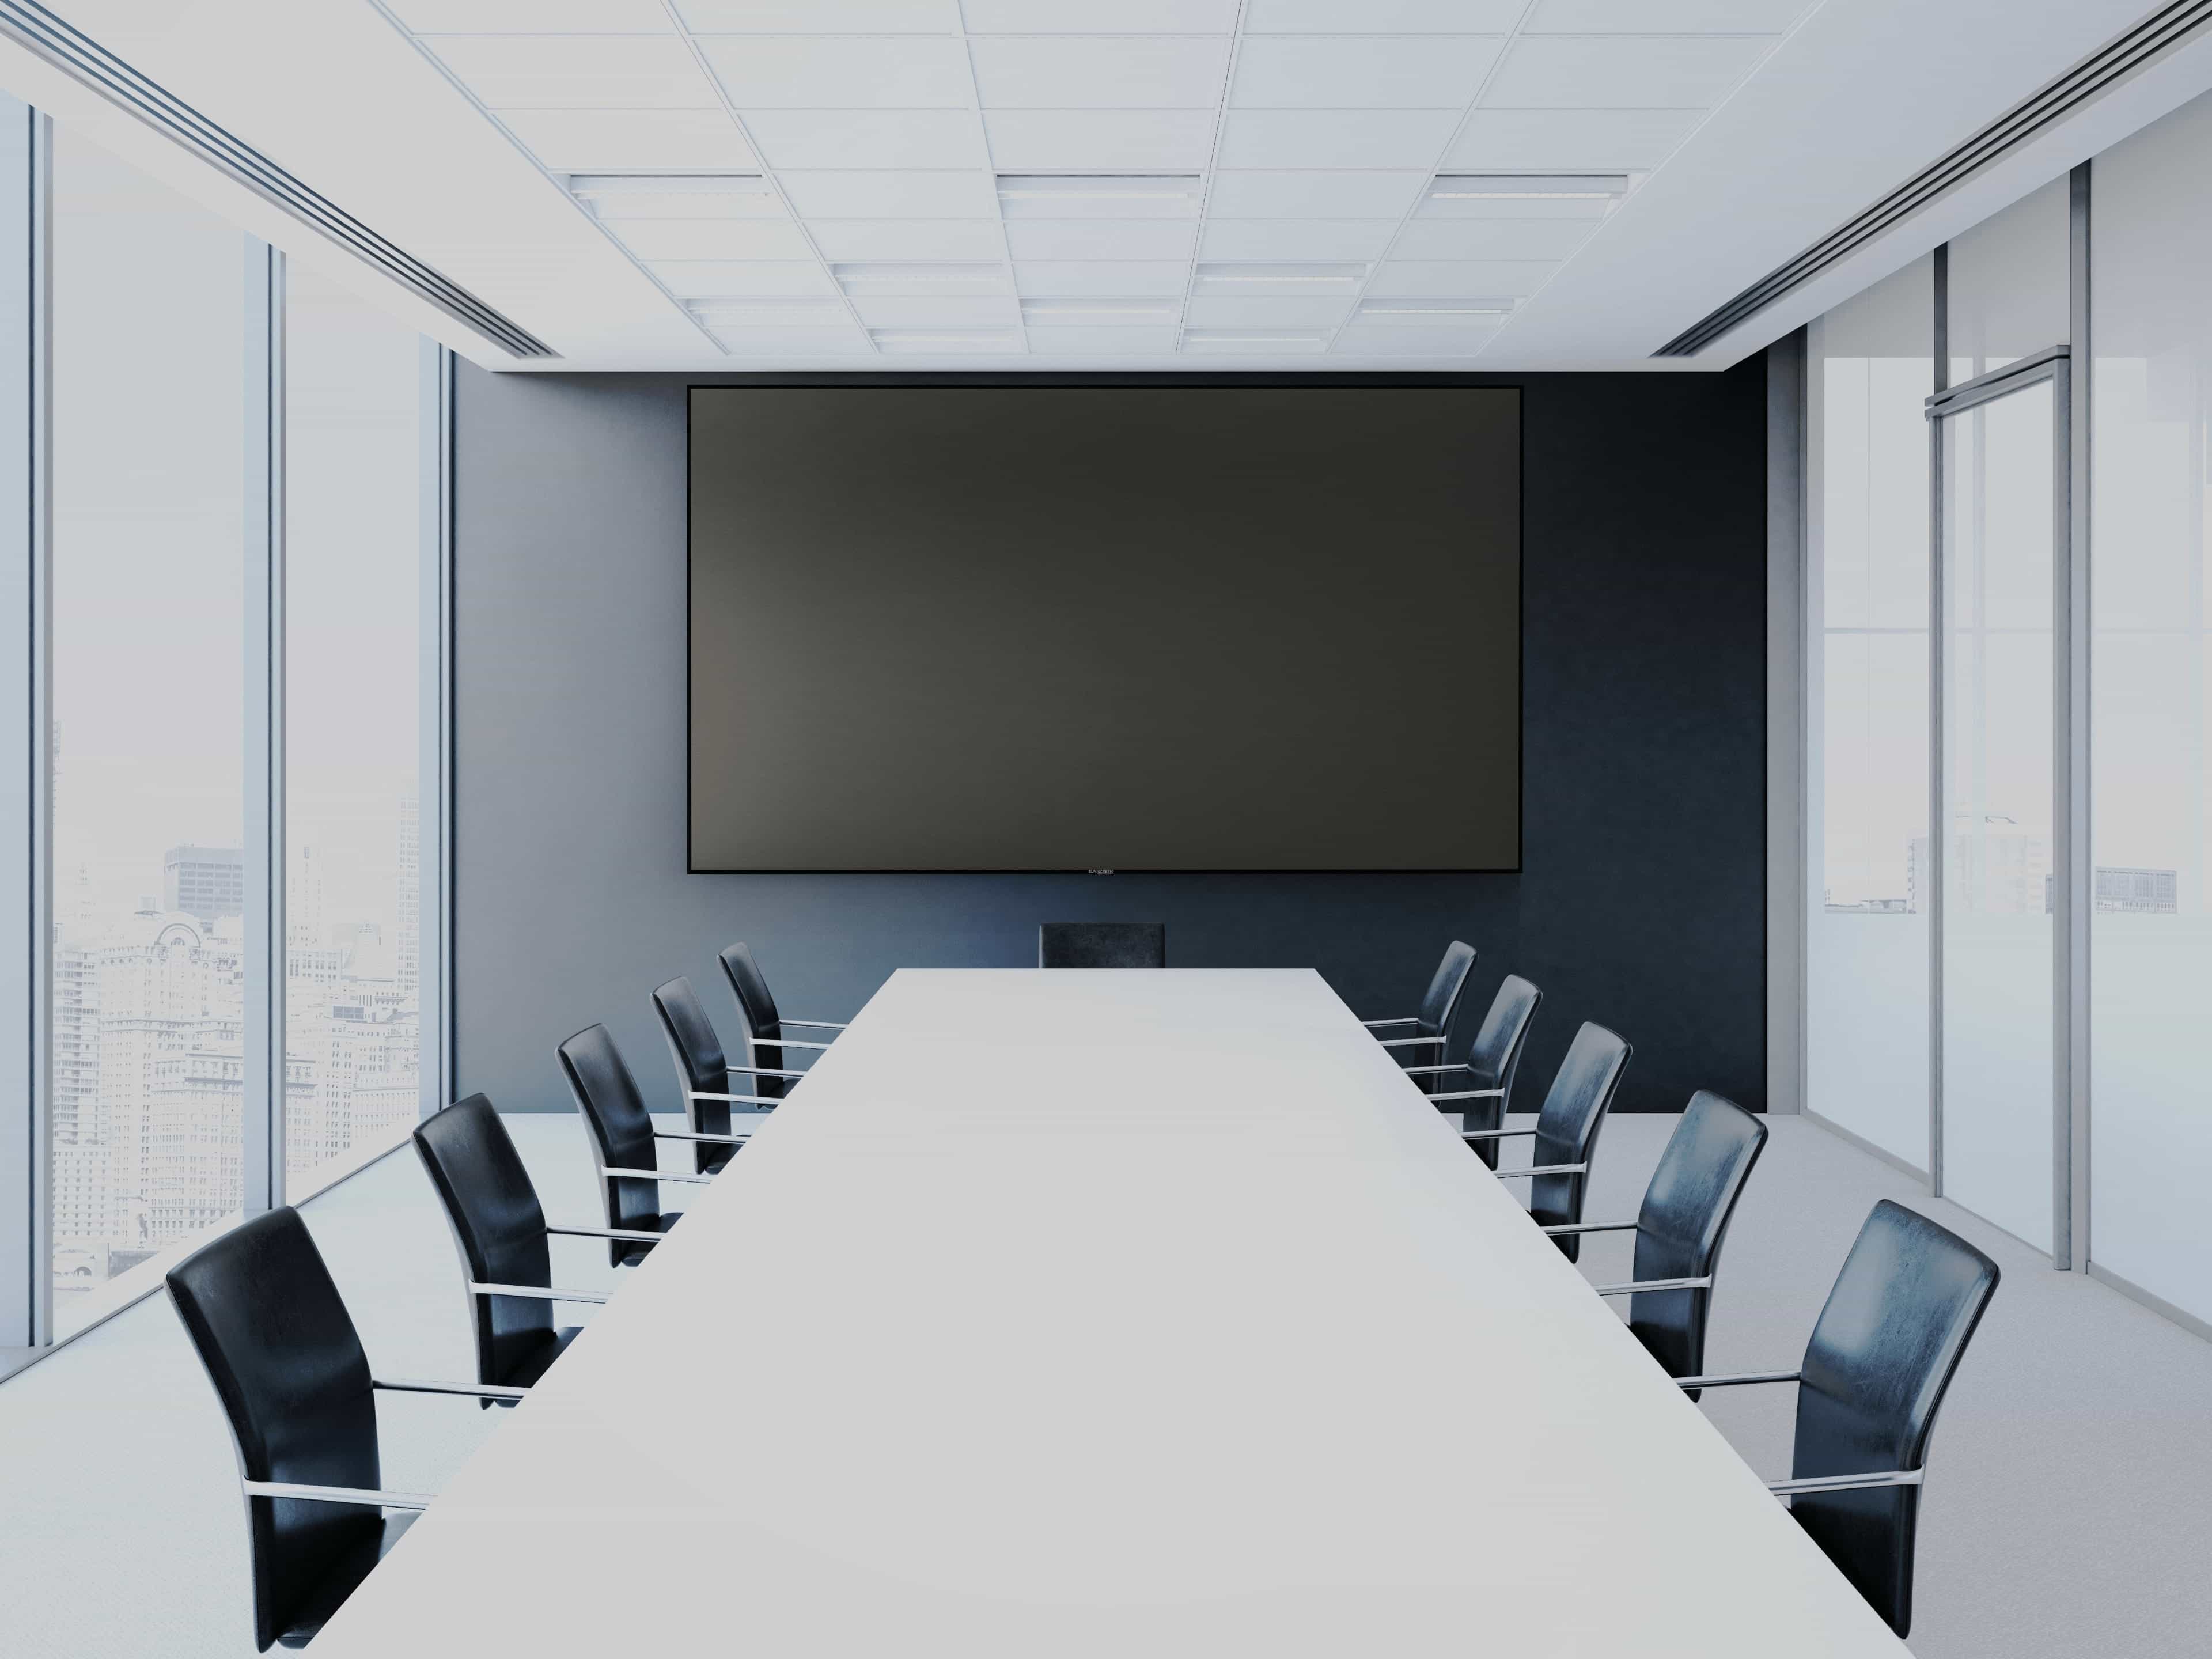 How To Choose A Projector Screen